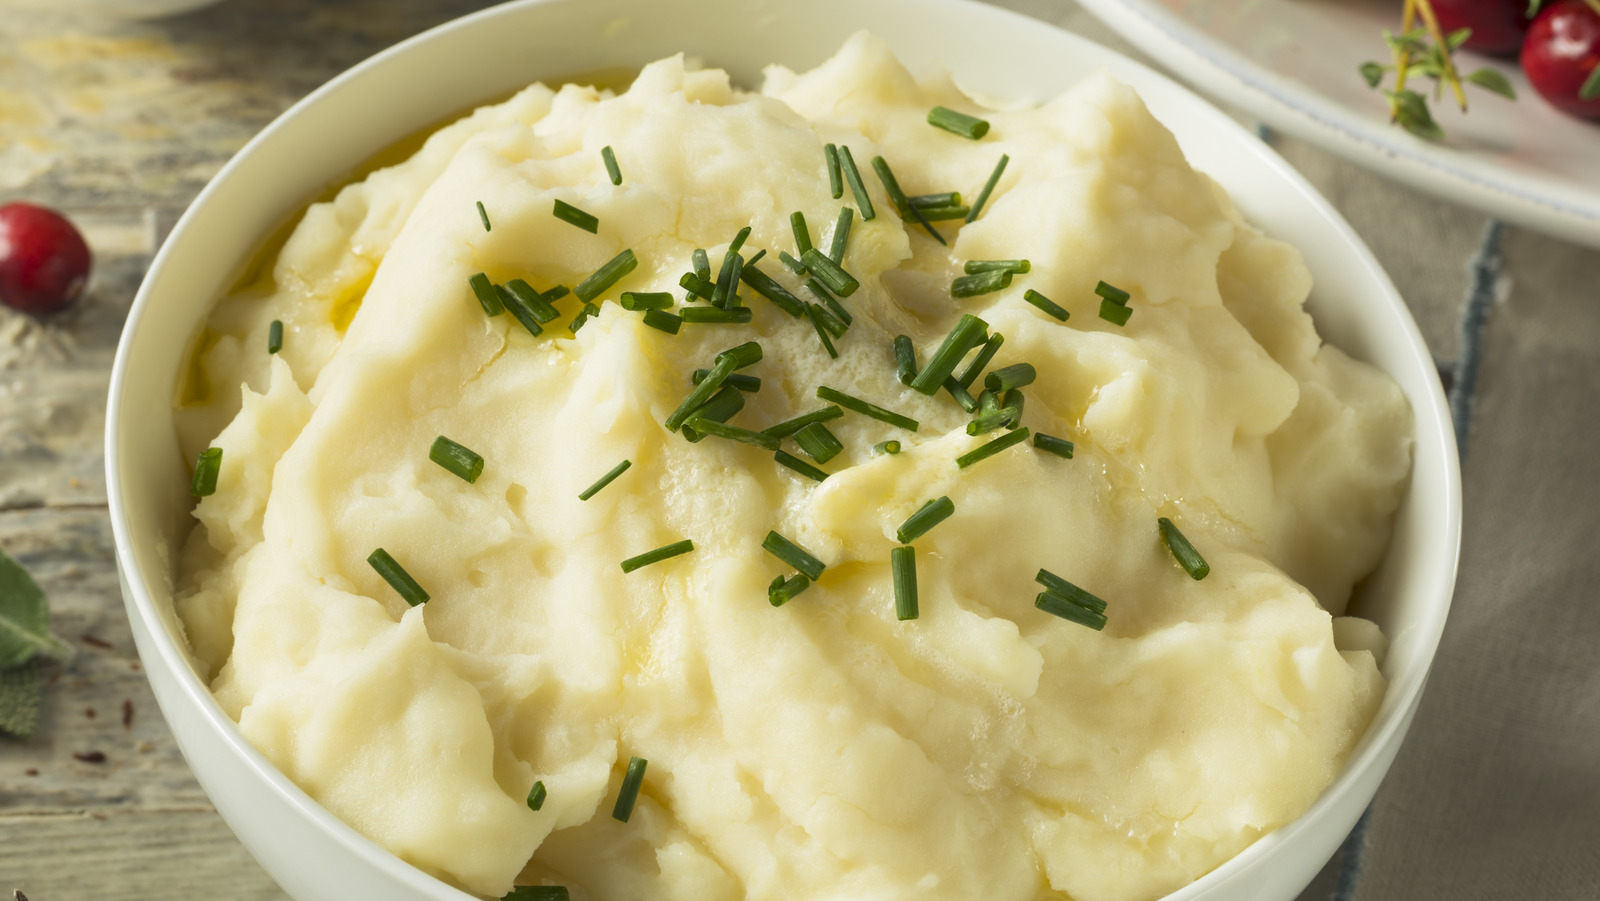 Why Dried Chives Are Better Than Fresh For Mashed Potatoes